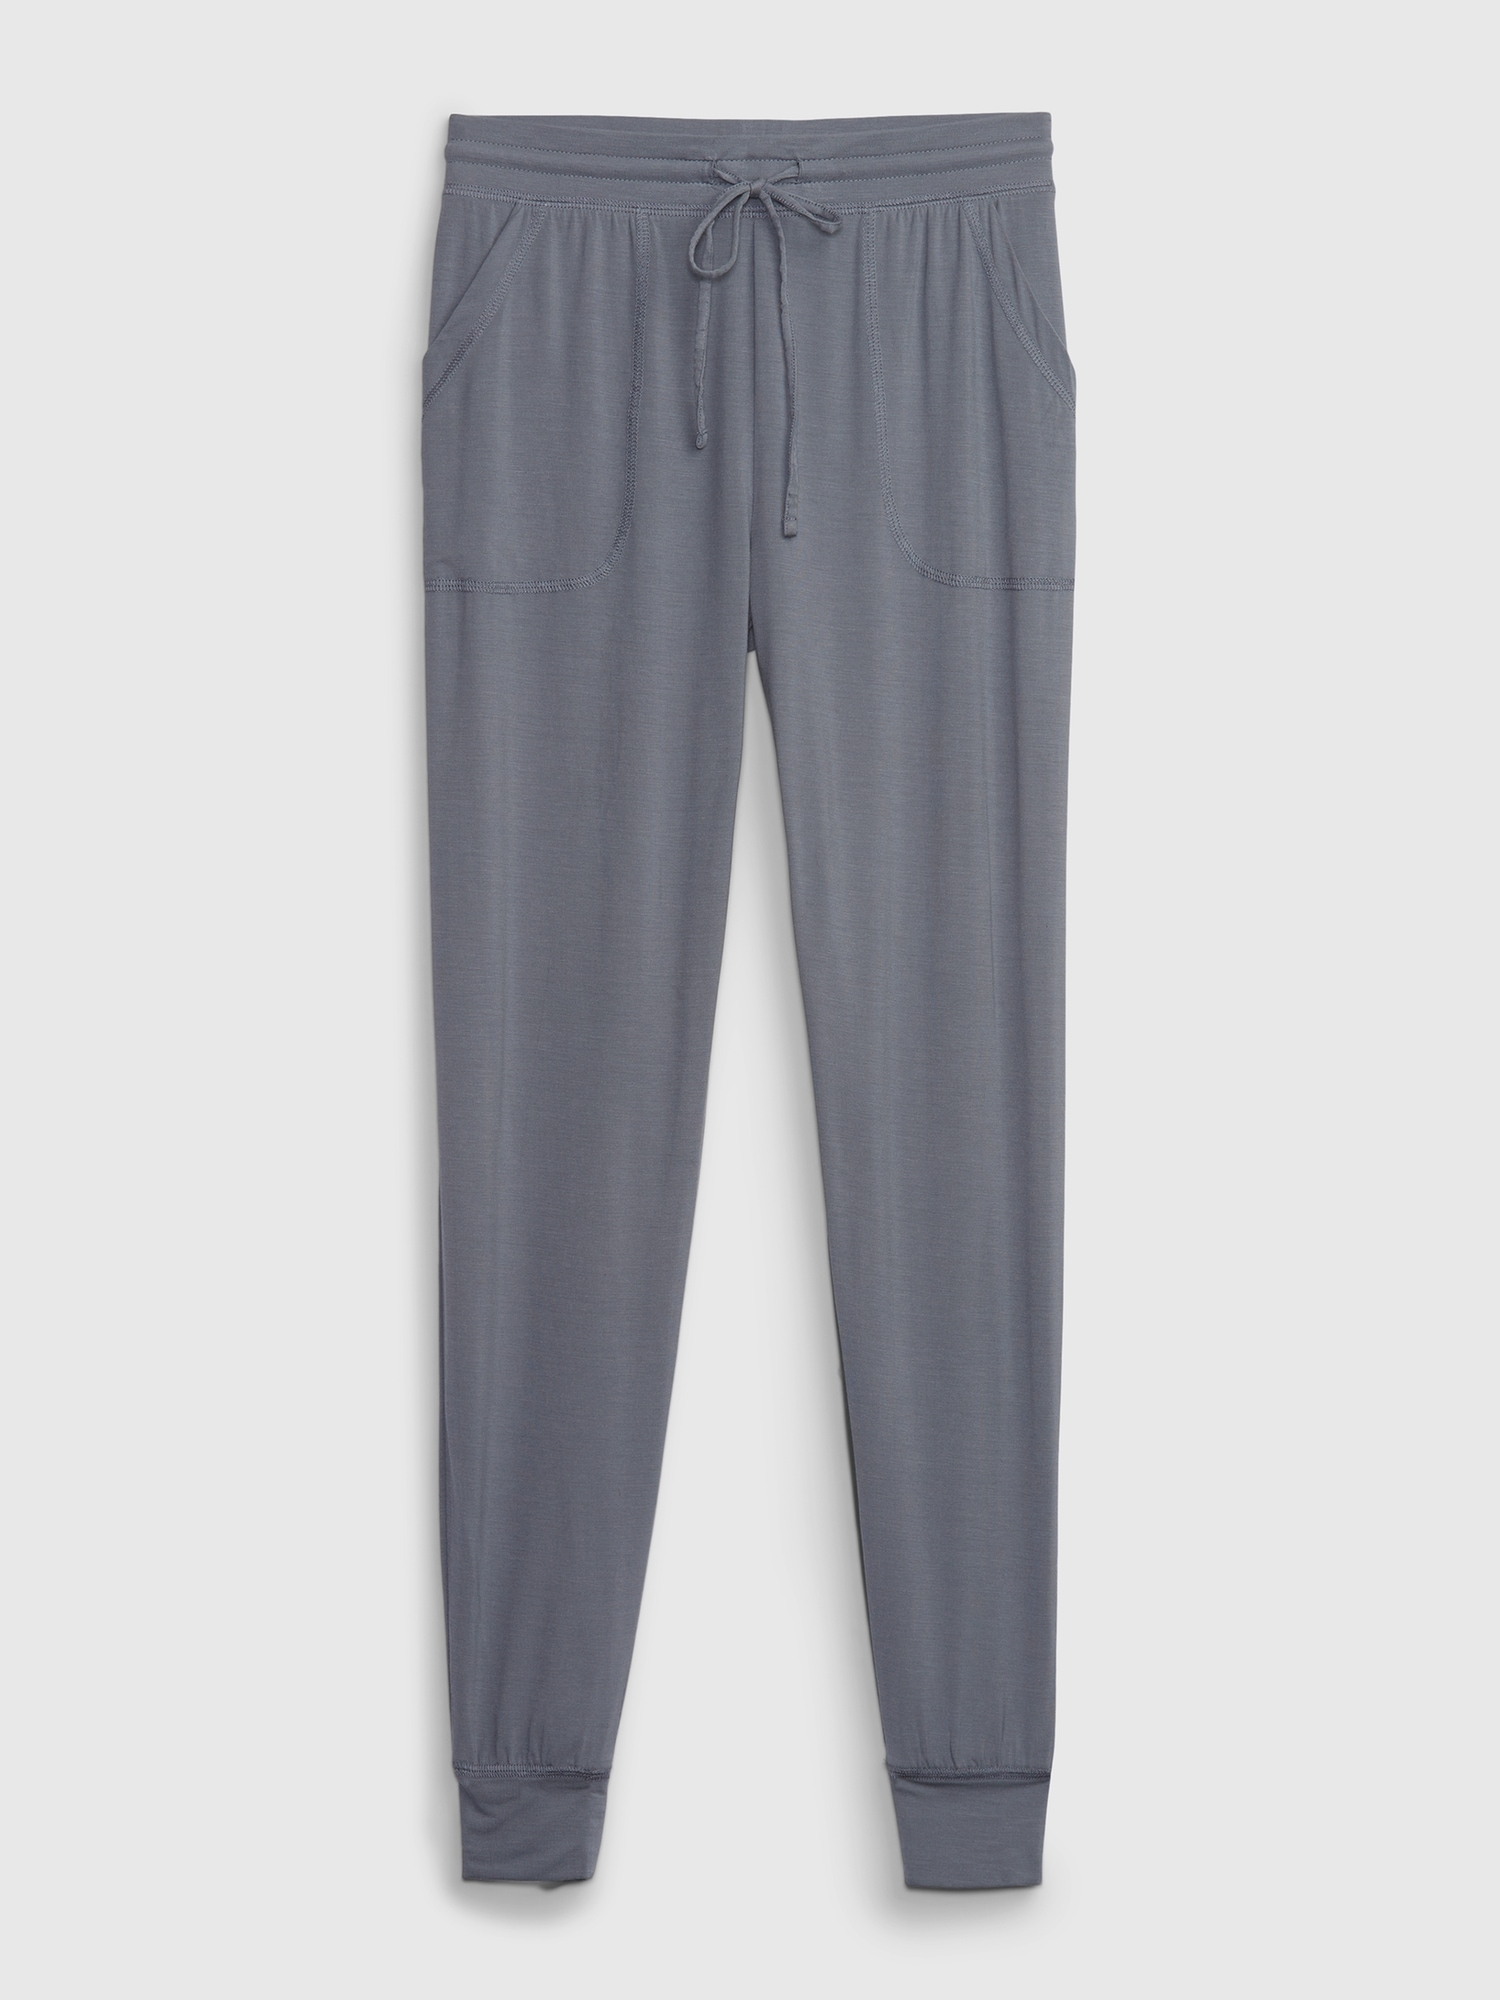 Supersoft Joggers in Modal